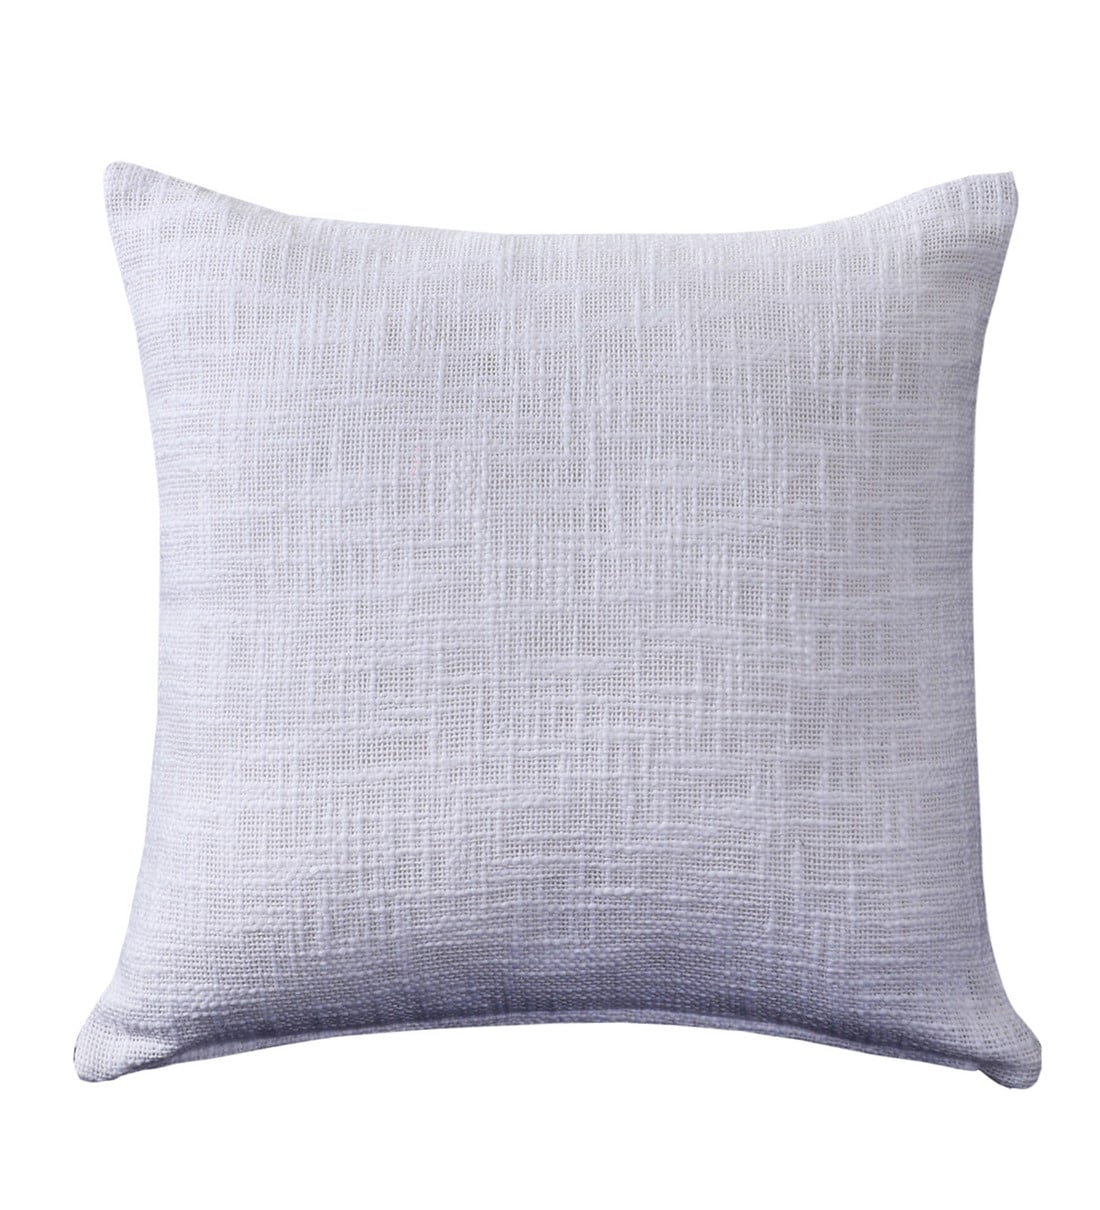 Mannu Fabric Geometric 16x16 inches Cushion + Covers (Pack of 2) In Lit Grey Colour